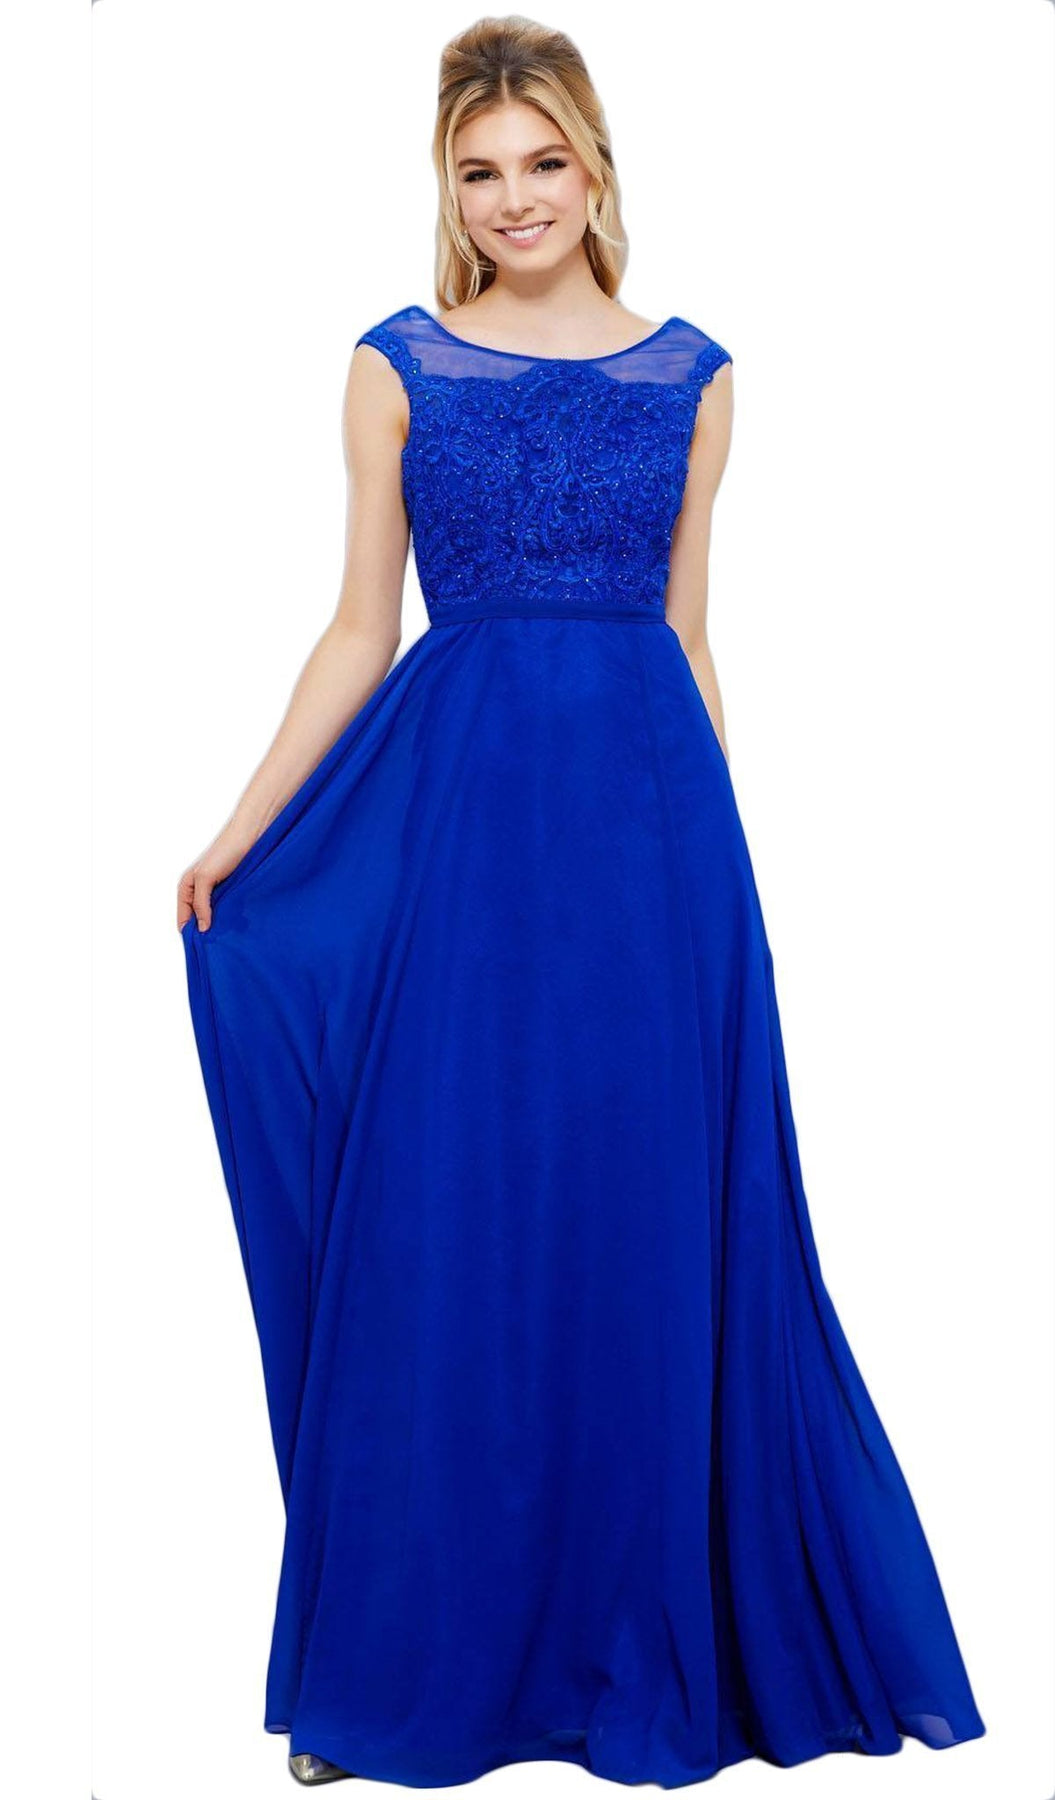 Nox Anabel - 8314 Elegant Lace Bodice Scoop Back Chiffon A-Line Evening Gown Special Occasion Dress XS / Royal Blue